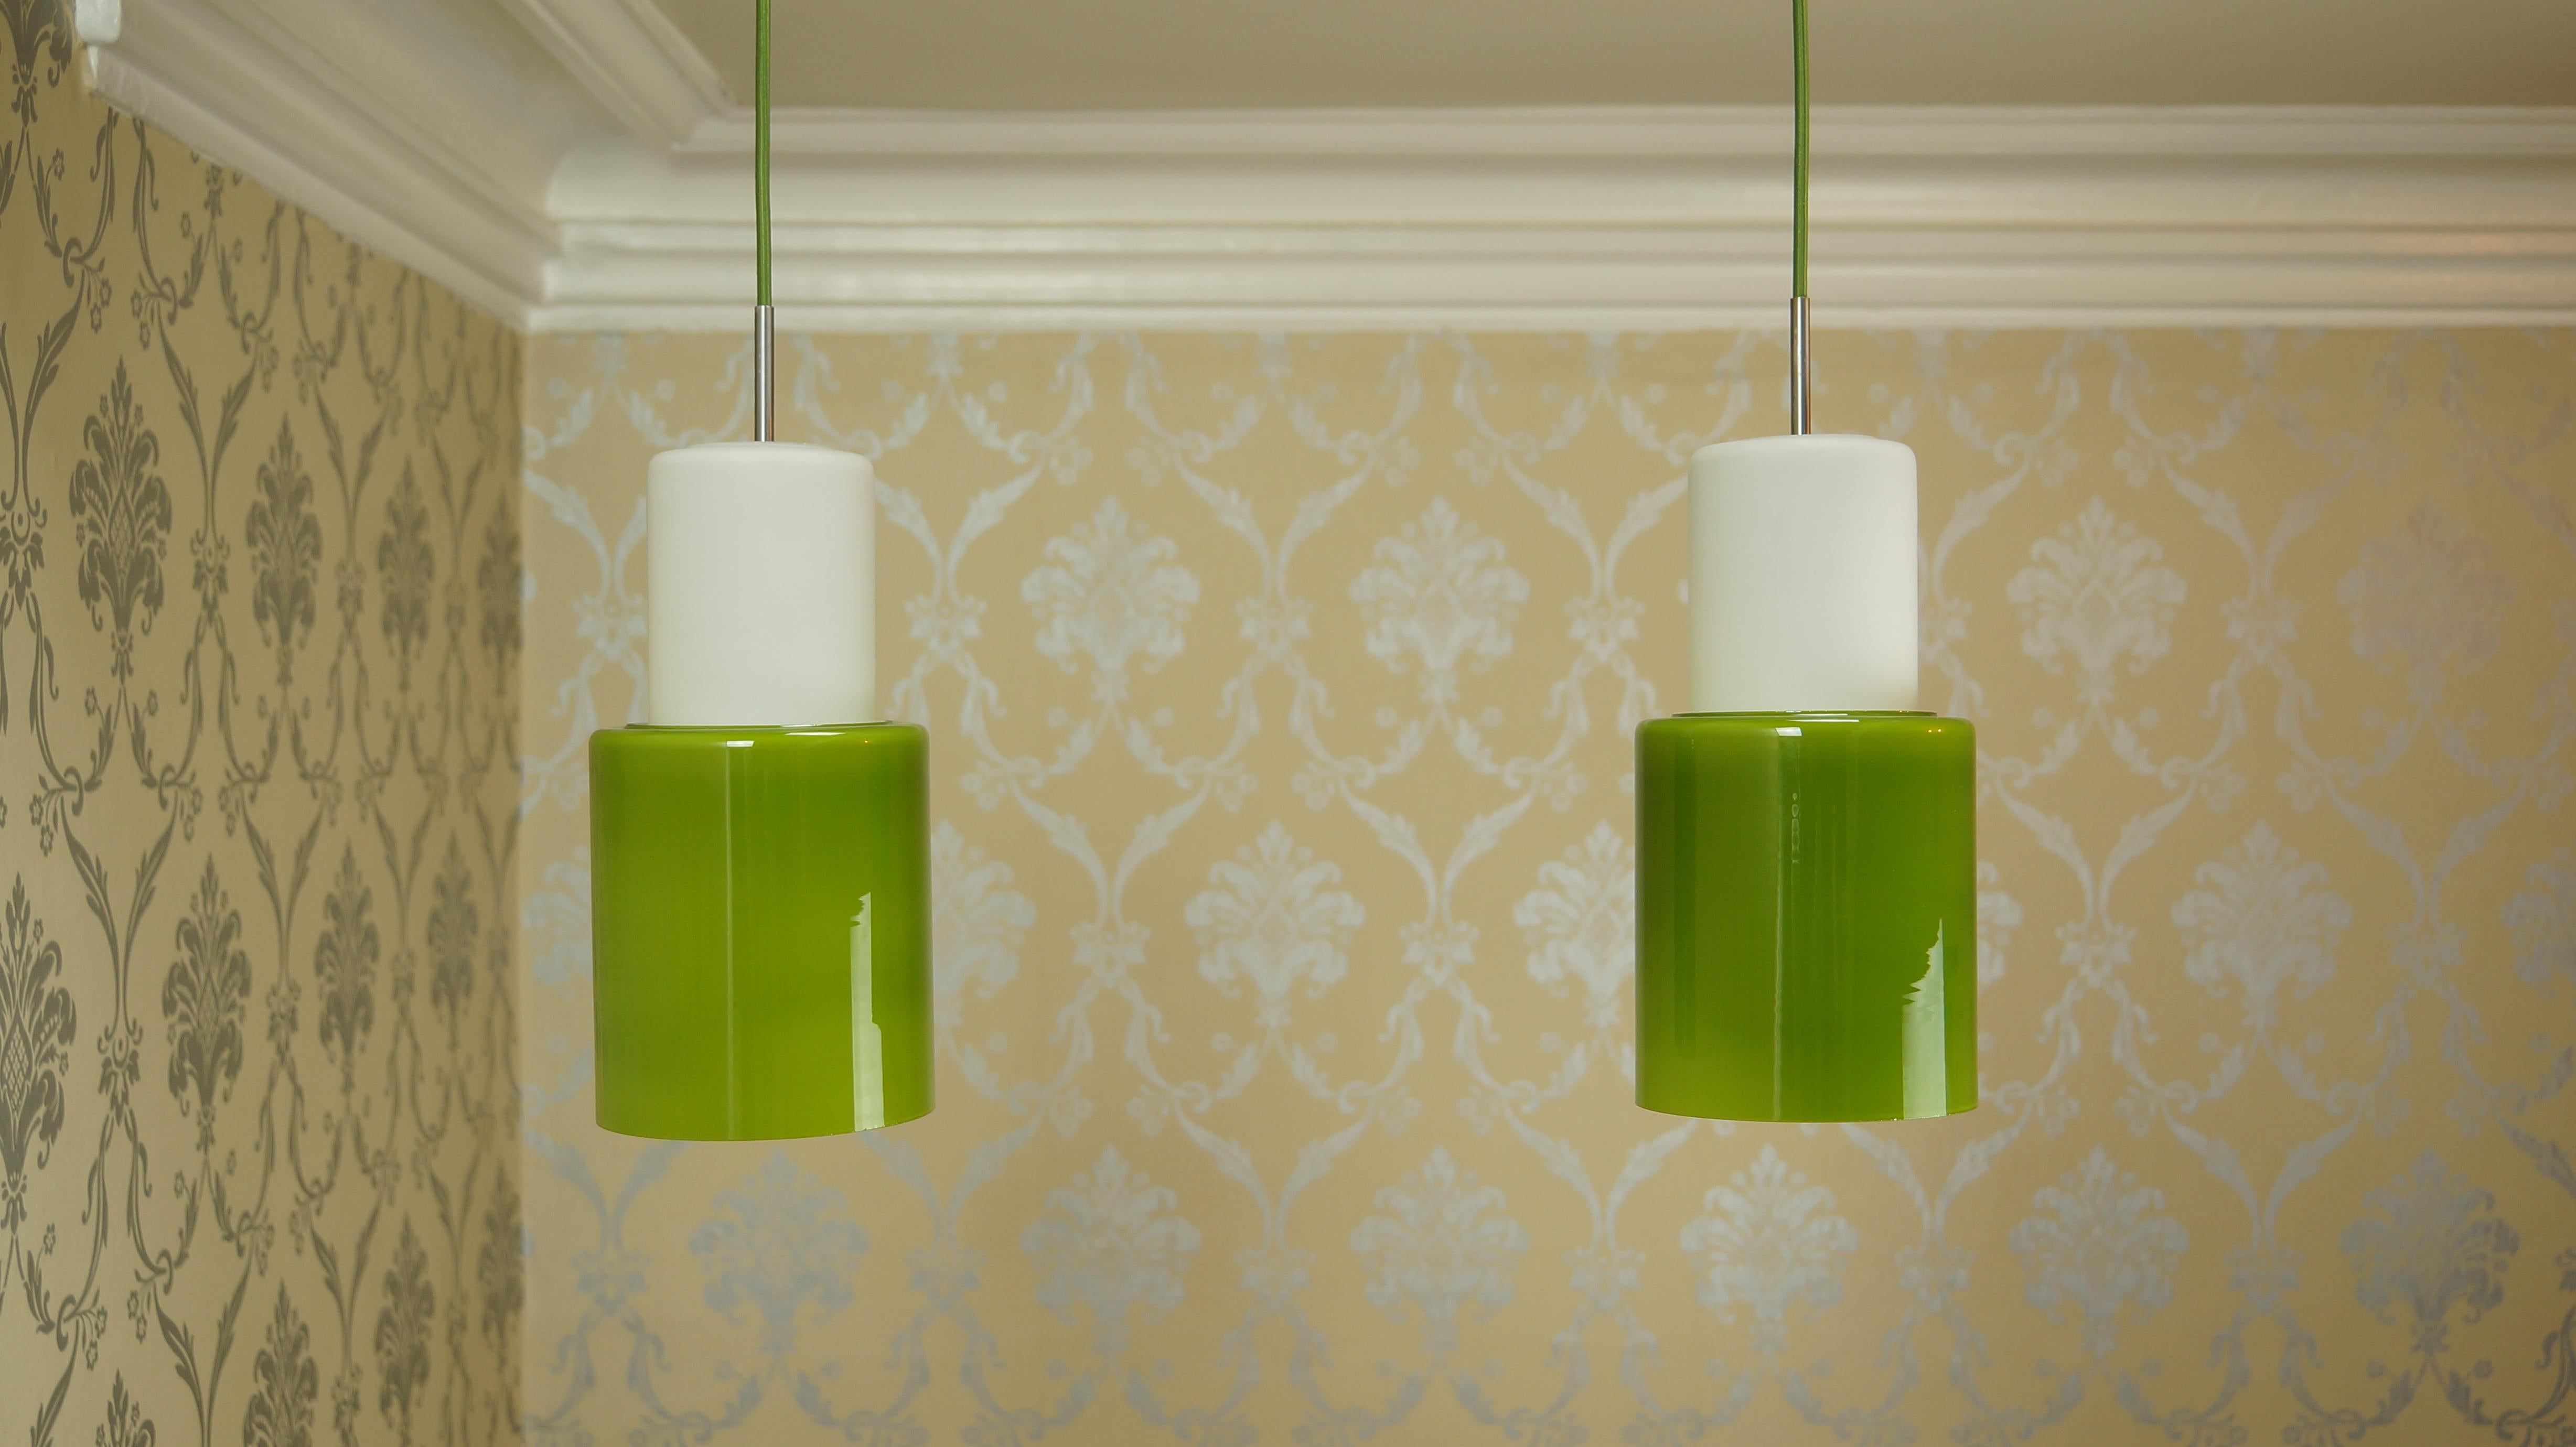 Pair of vintage green and opaline glass Danish ceiling pendant lights, Retro, 1960s, Mid-Century Modern.

An eye-catching pair of Danish pendant lights dating from the 1960s in gorgeous green and white cased glass, opaline glass and a stainless